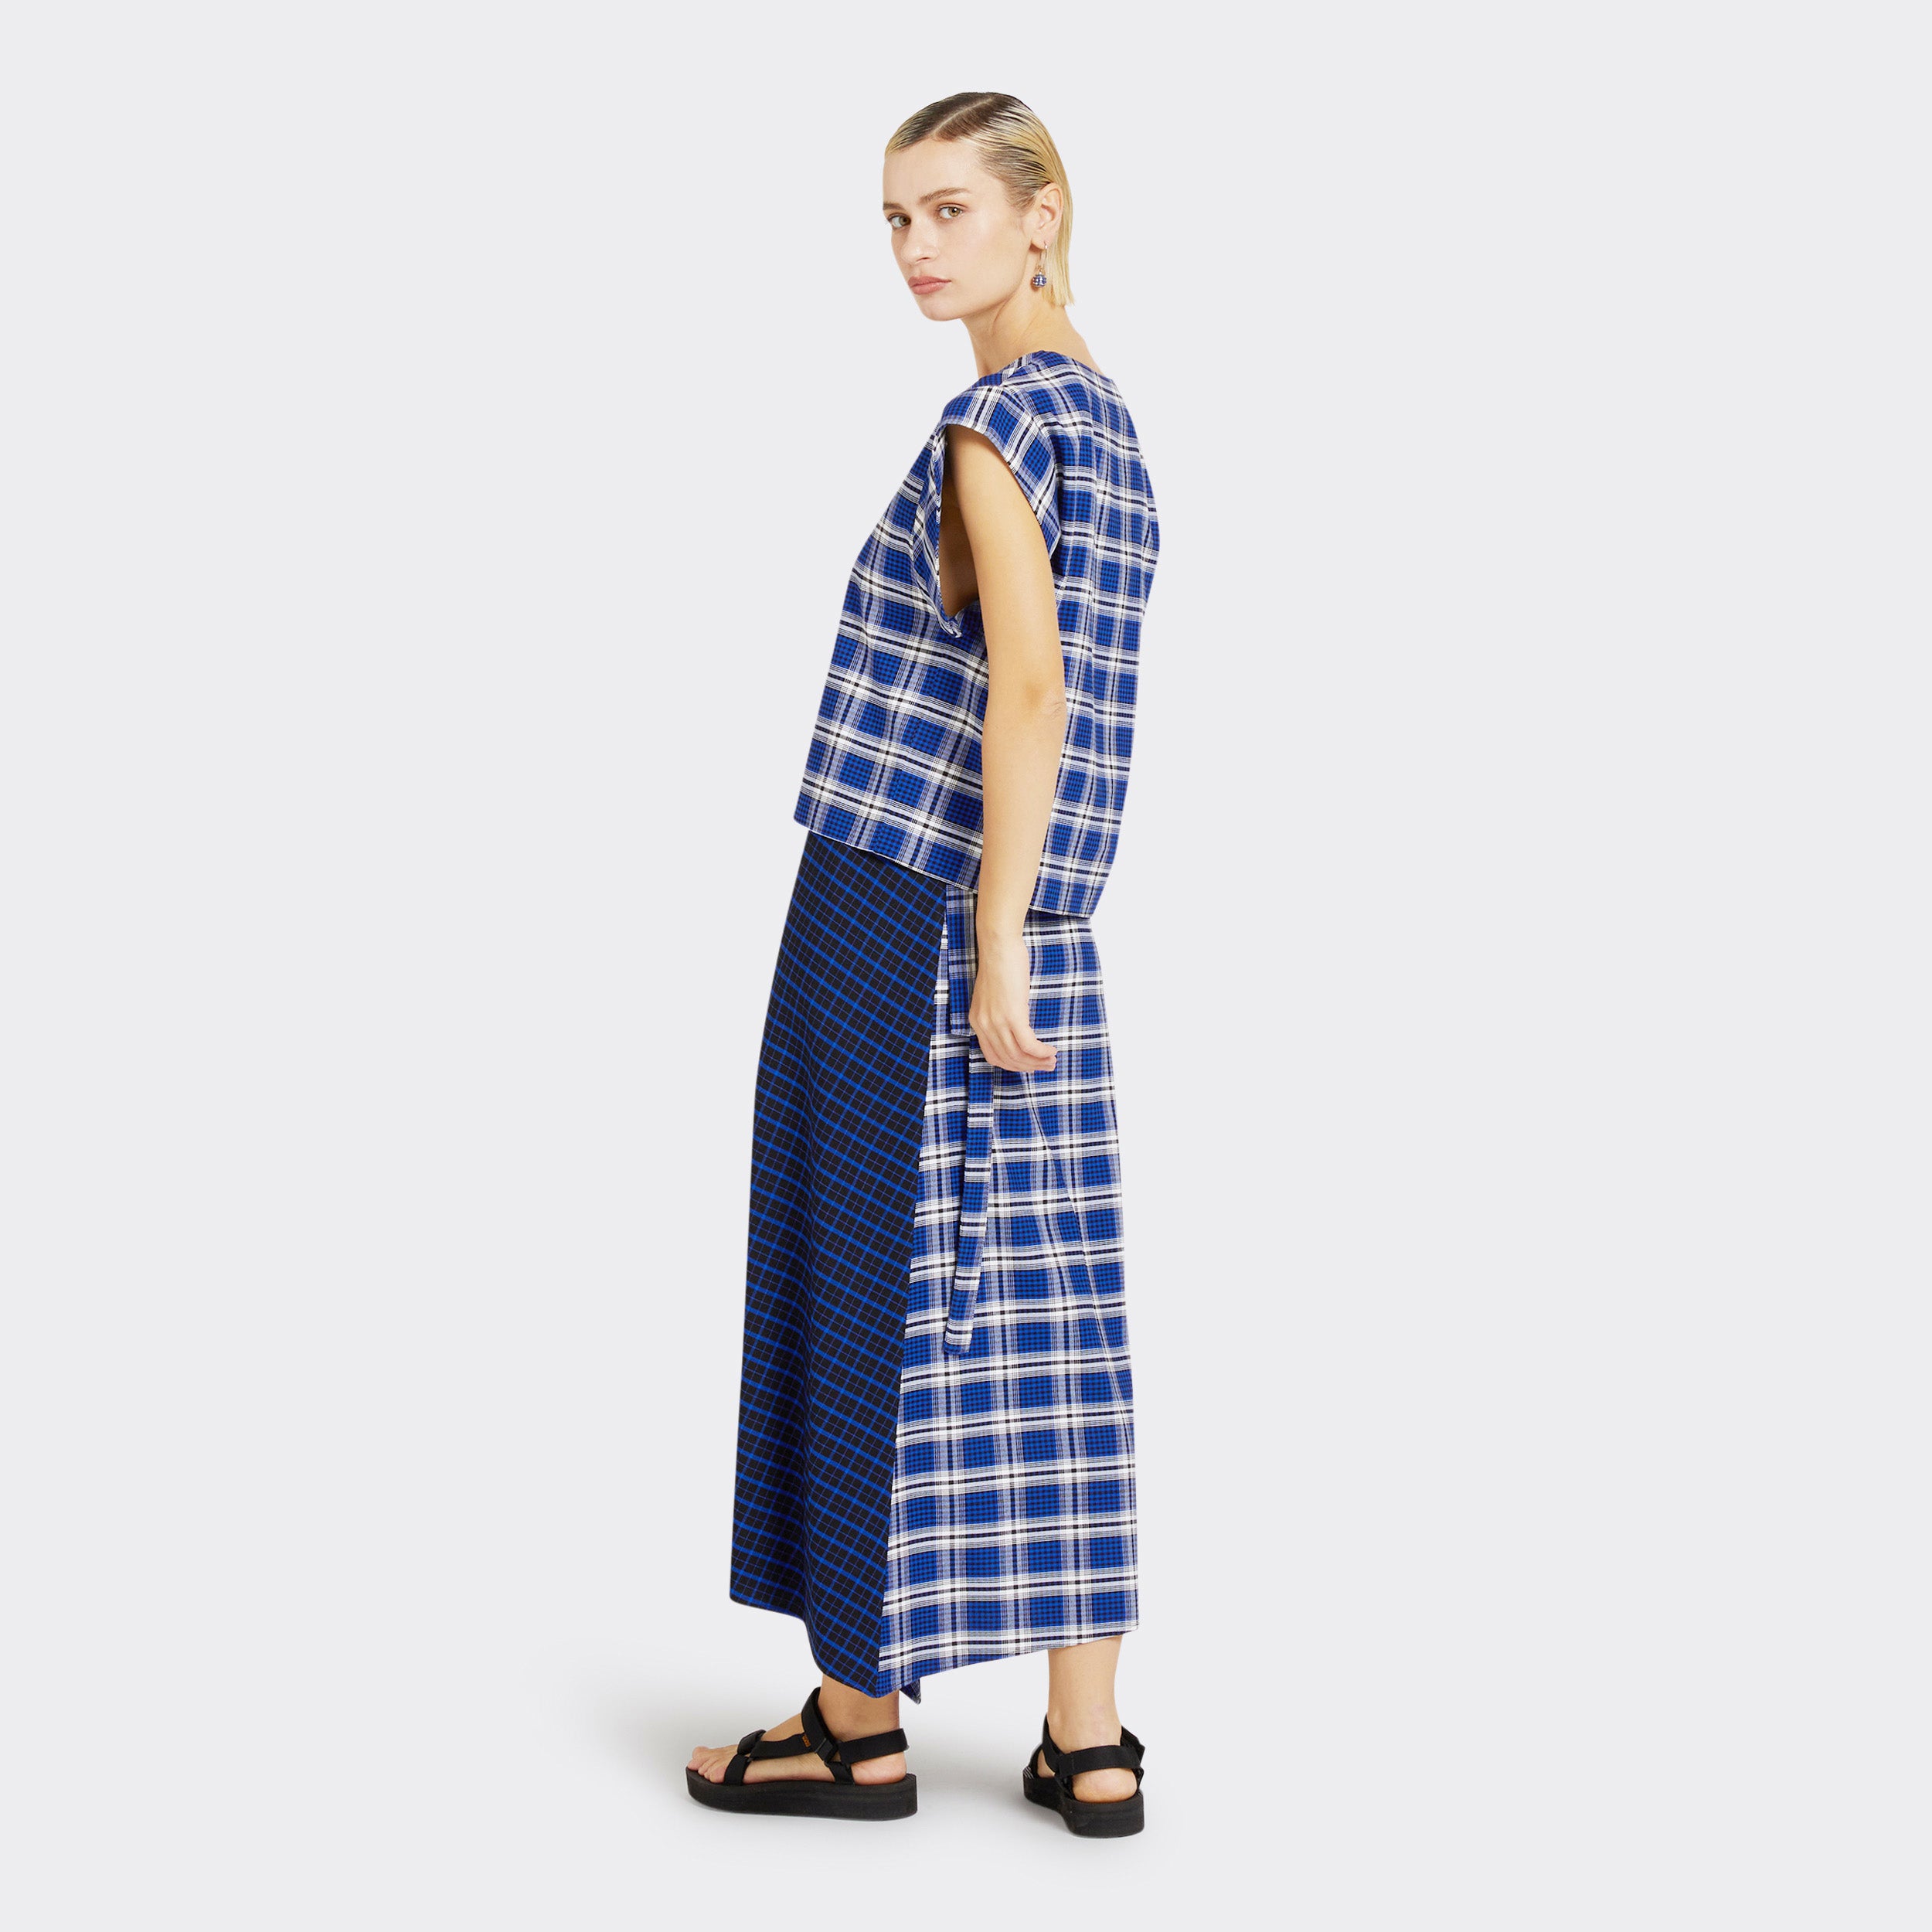 Model wears a Maasai Check wrap skirt in blue and white. She also wears a matching V-Neck top in a Maasai Check print that is blue and white.